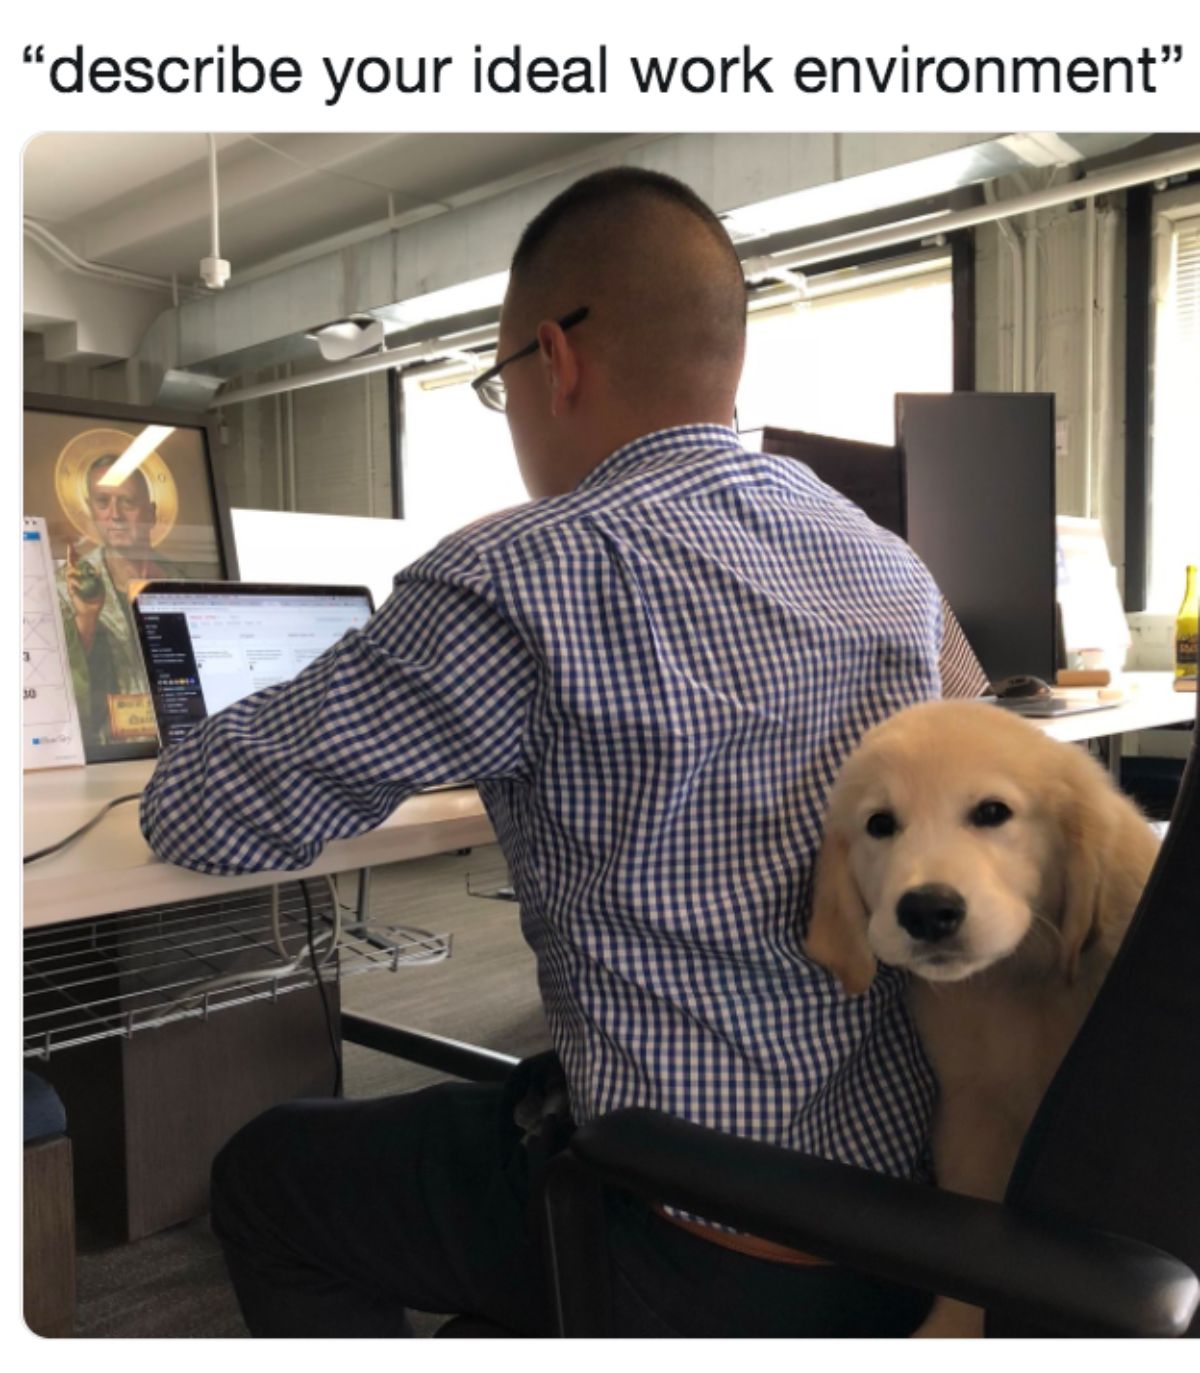 golden retriever puppy behind a man on a chair in an office with caption saying describe your ideal work environment